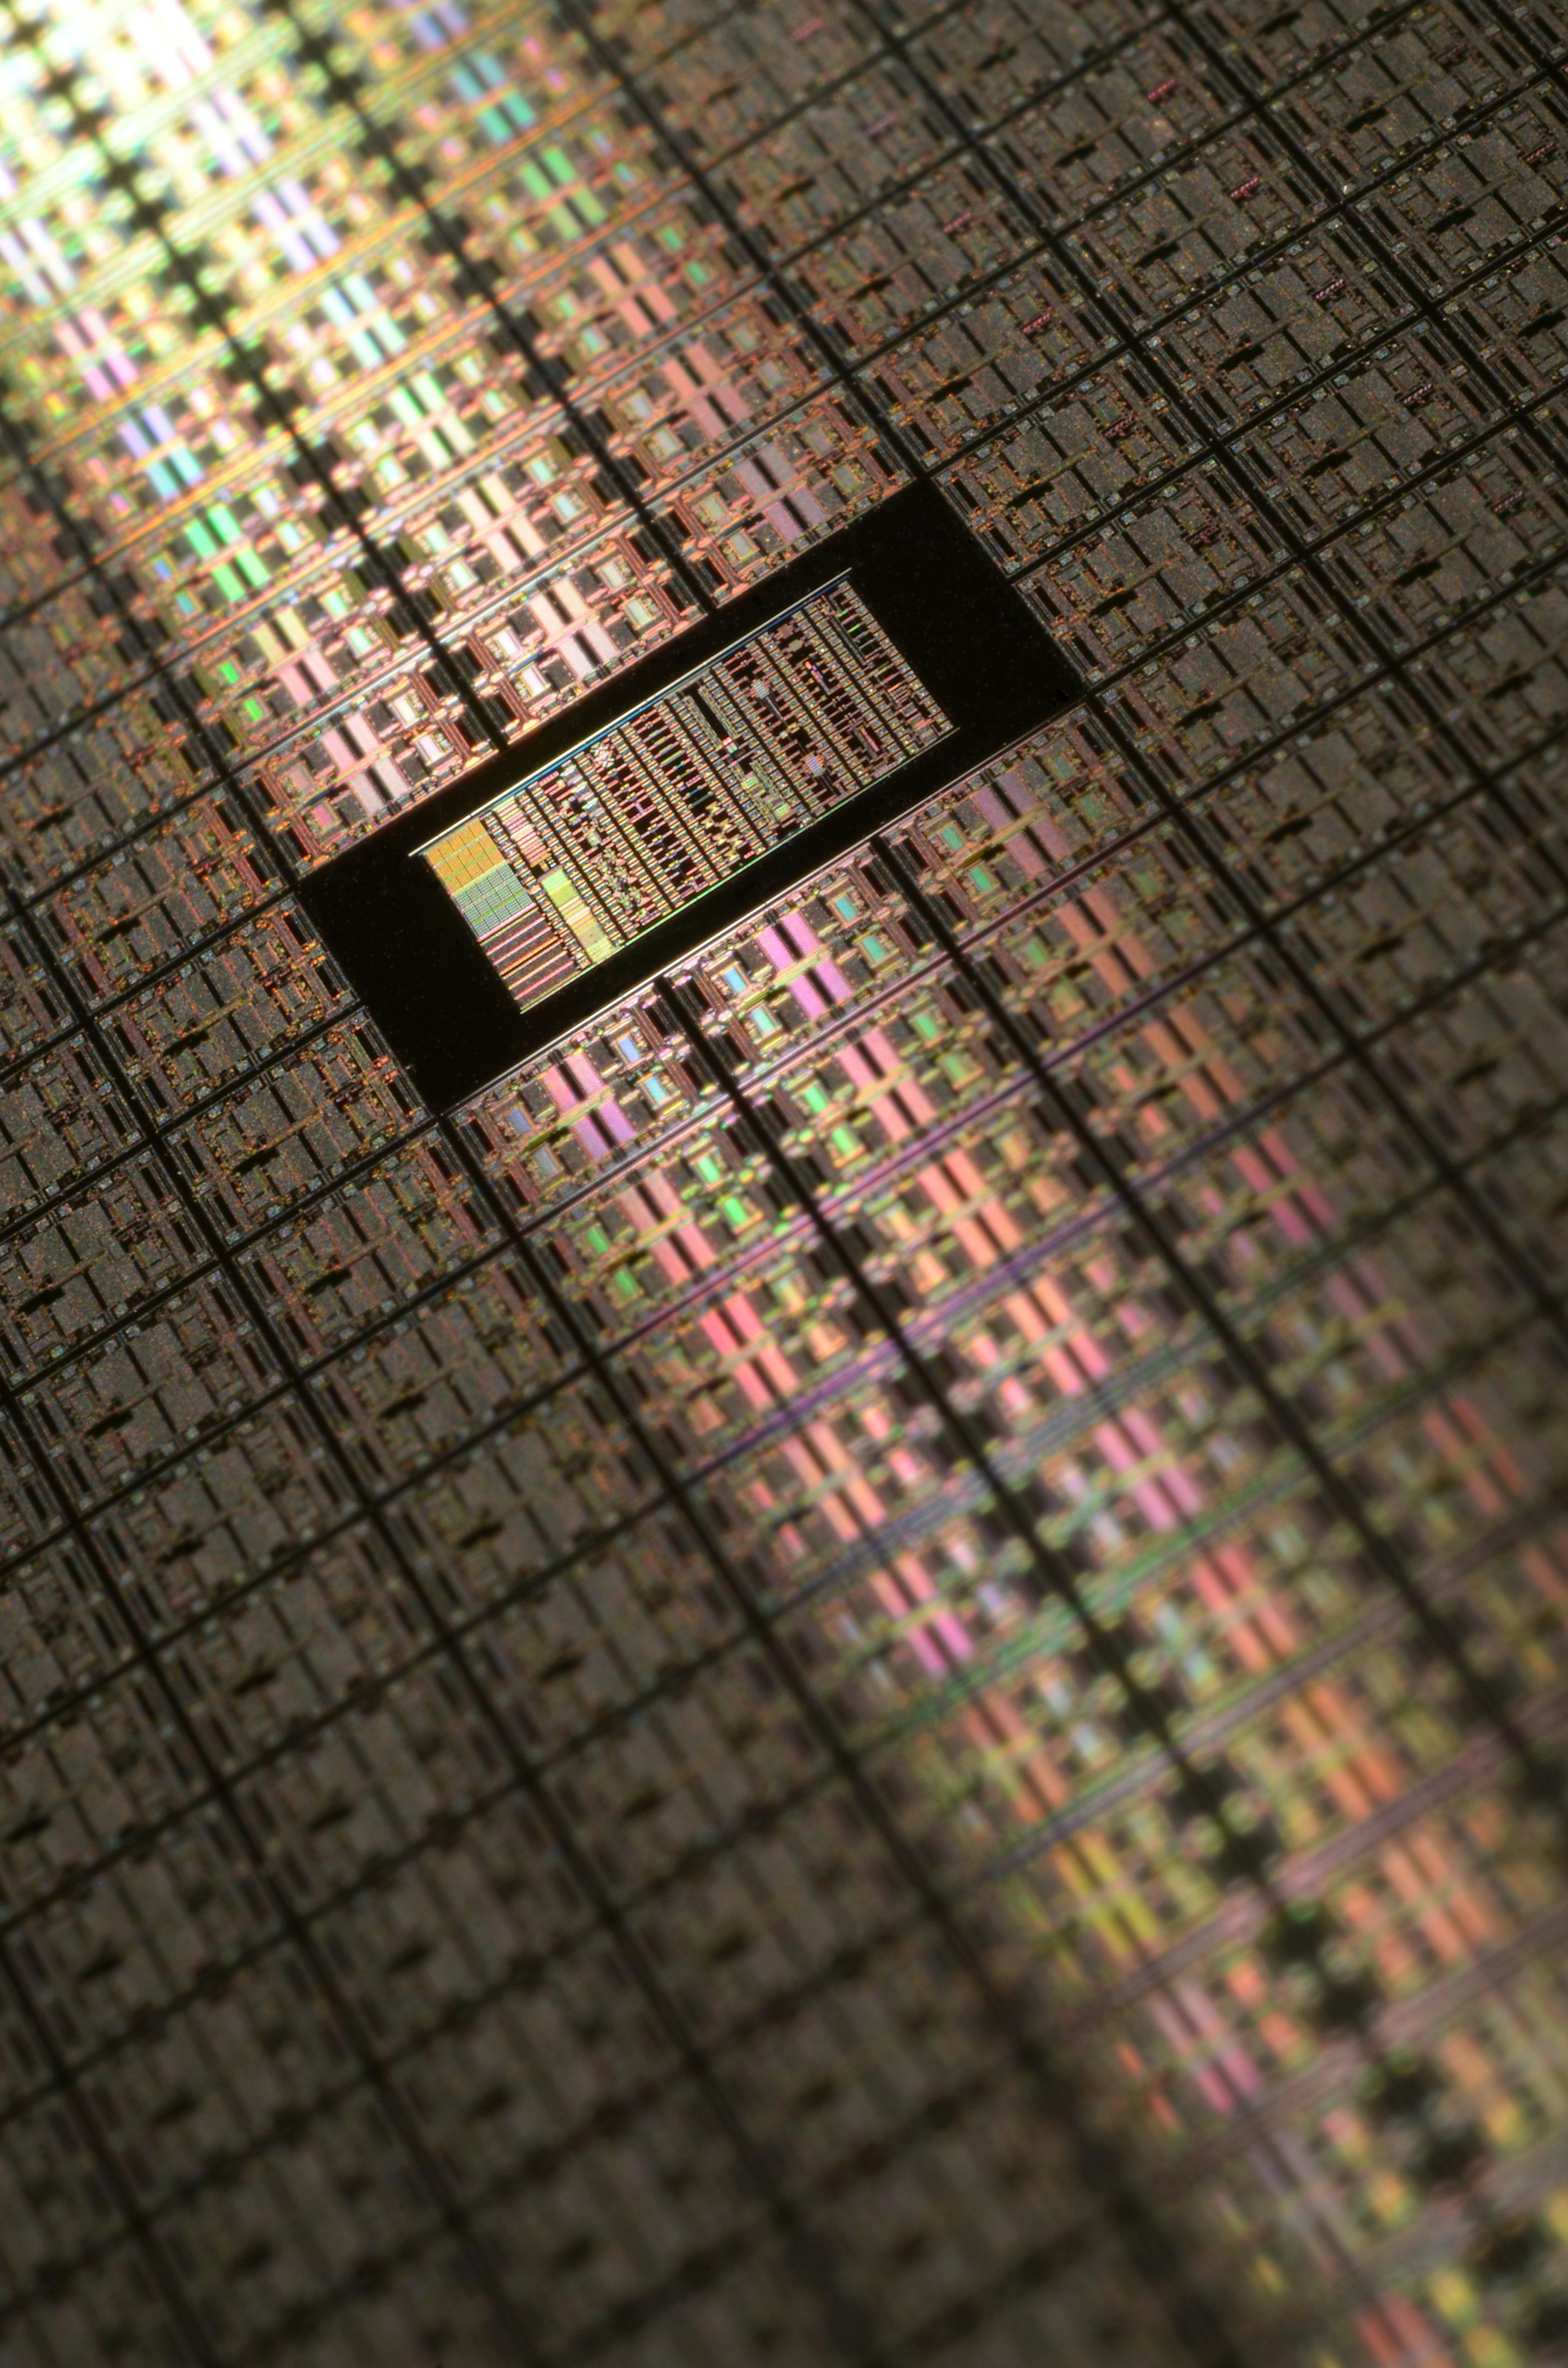 TSMC’s Quarterly High-performance Computing Sales Surpass Smartphones for First Time in Q1 2022